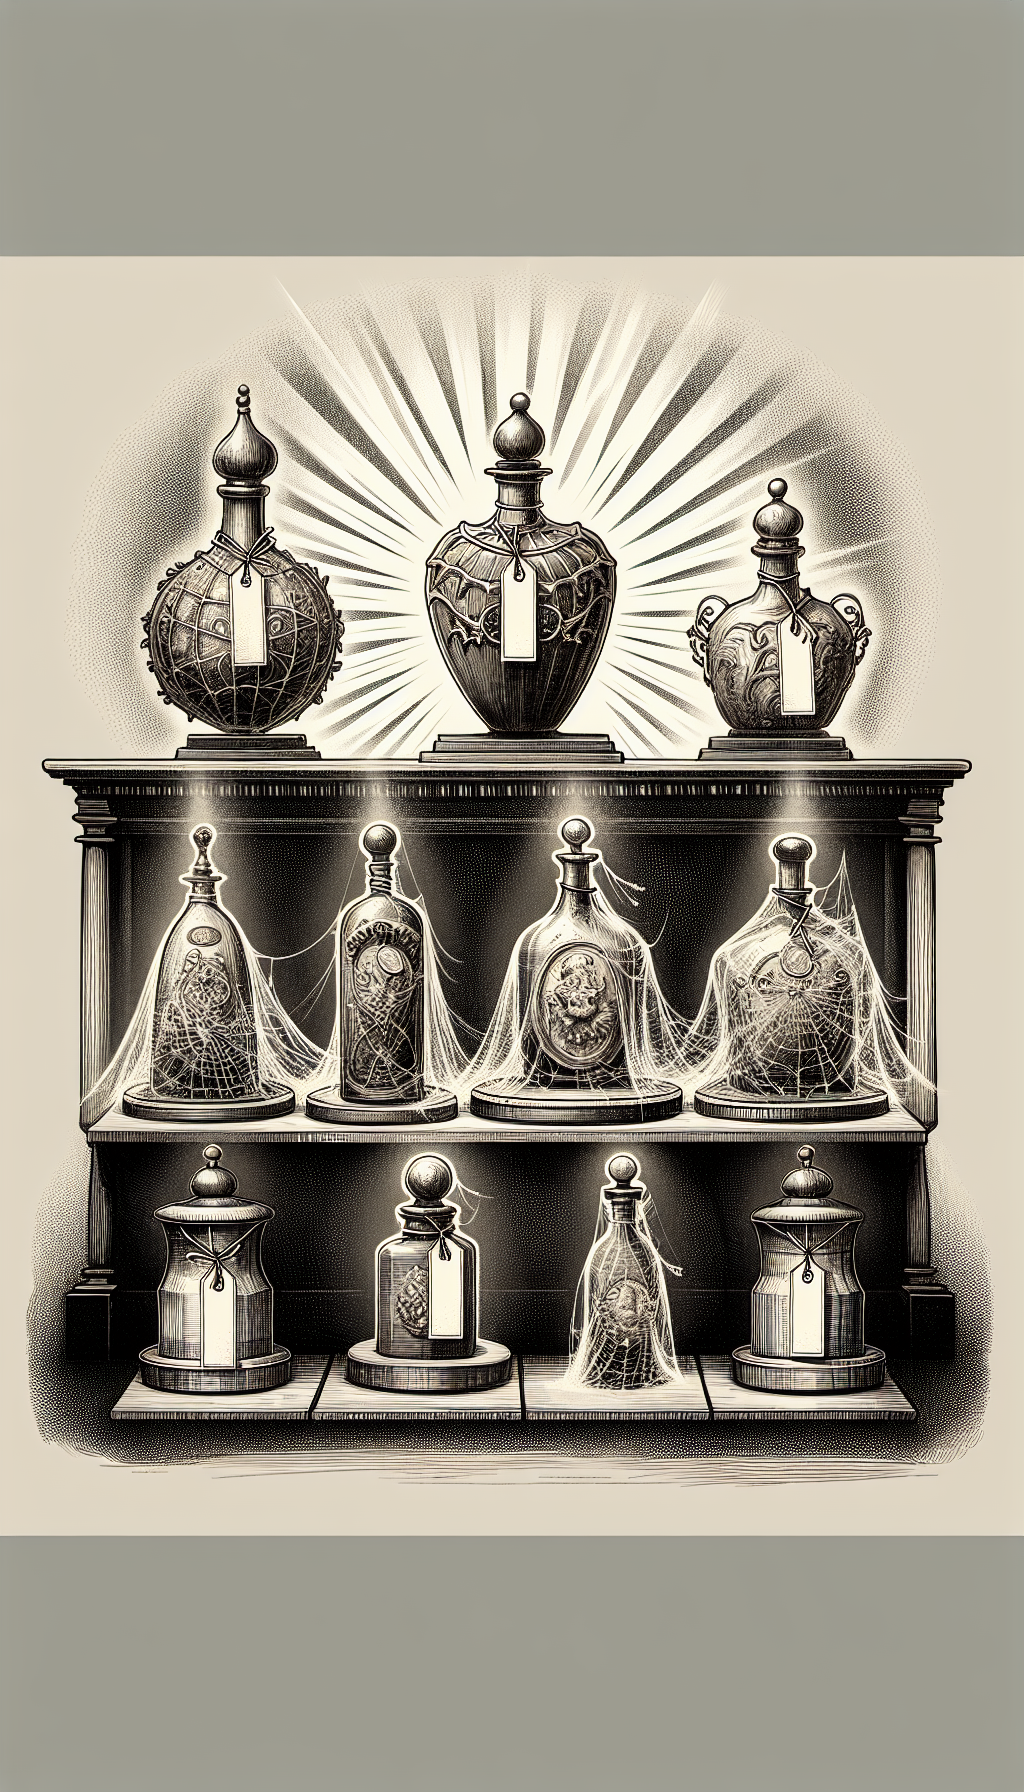 A vintage, hand-drawn illustration features an elegant auction podium where a collection of intricately designed, cobwebbed bottles are displayed atop pedestals of varying heights, symbolizing their rarity and desirability. Each pedestal has a tag with escalating prices. A shimmering spotlight casts a glow on the oldest, most ornate bottle, illustrating its high value.